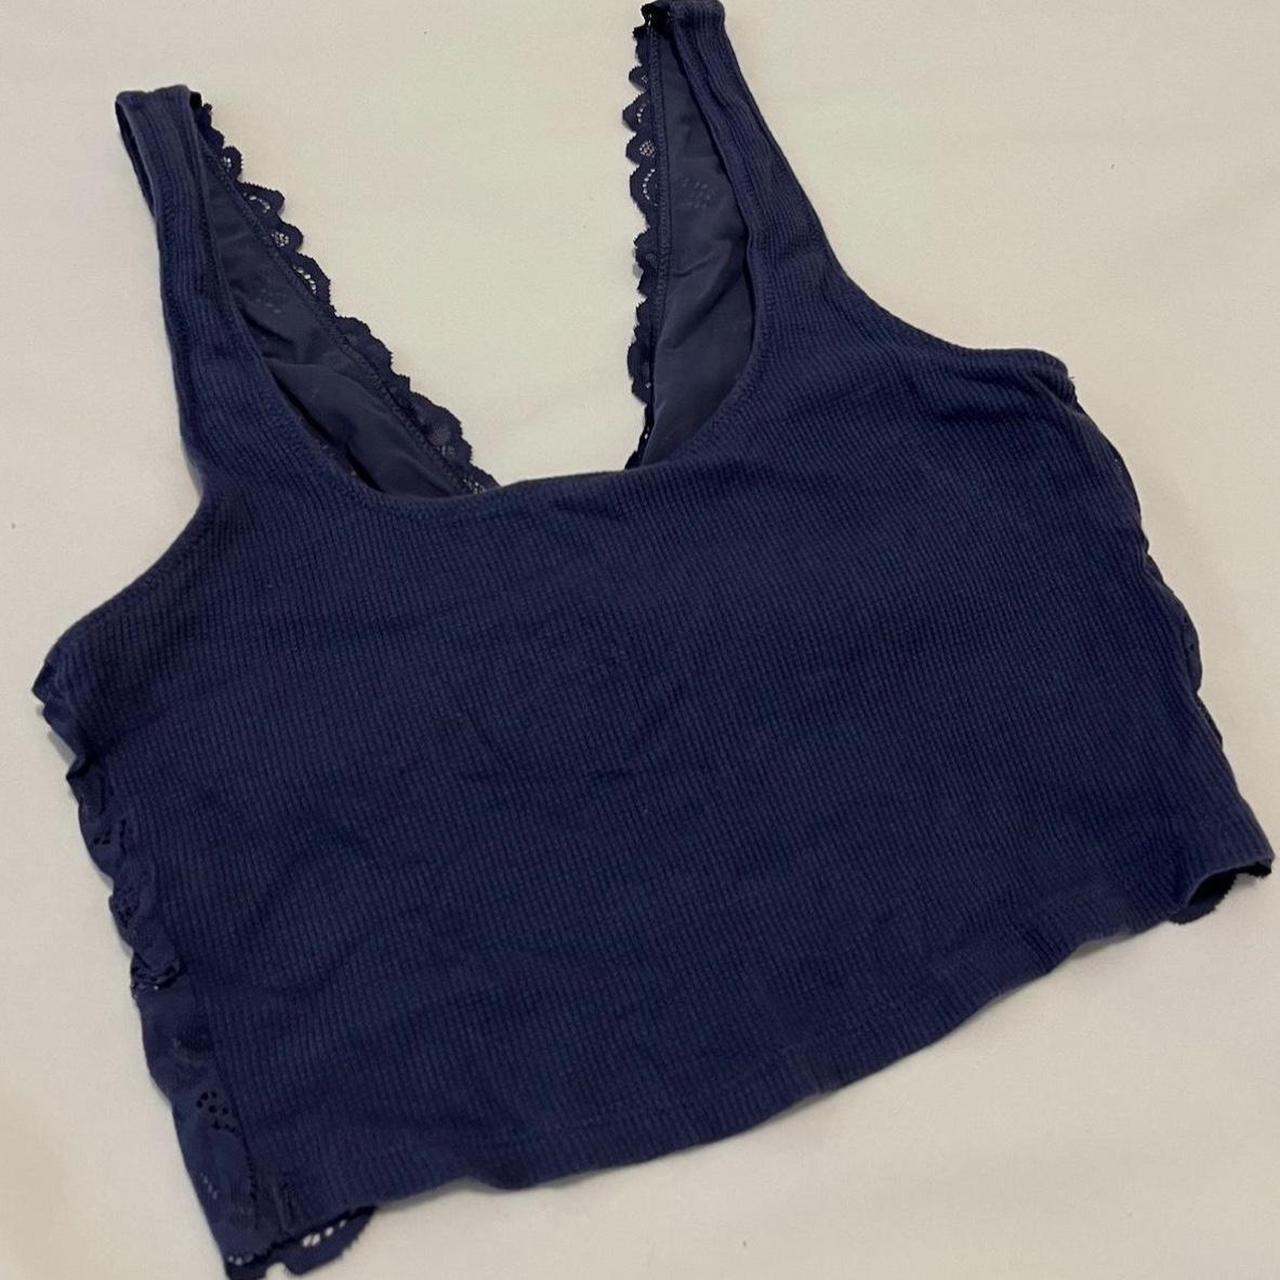 Aerie Rib Knit With Lace Bralette, Brand: Aerie, - Depop